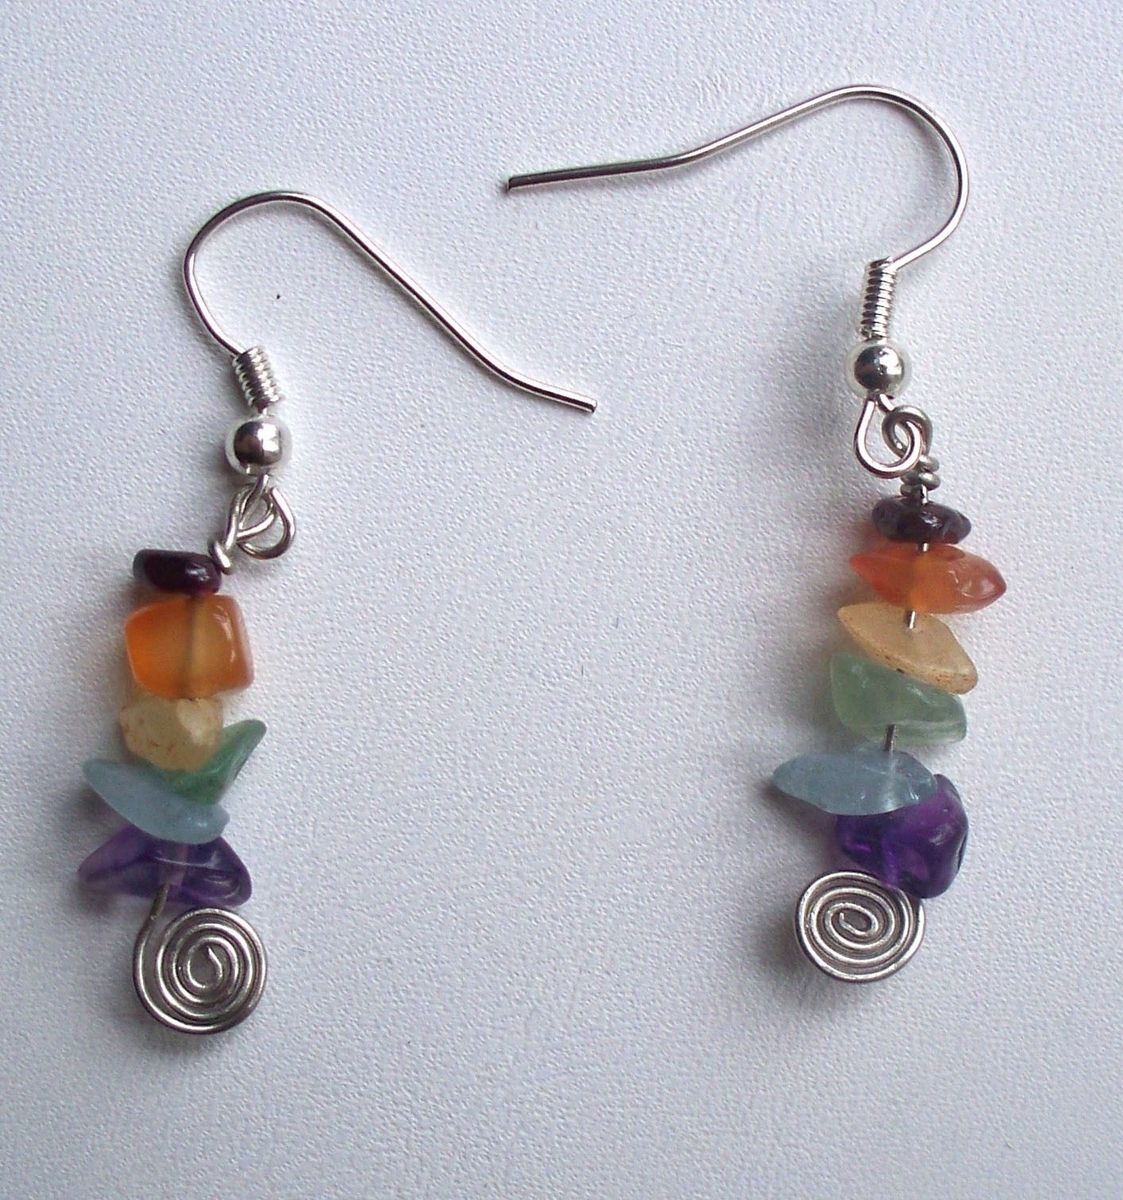 Hand Made Rainbow Gemstone Earrings - Nugget / Chips Of ...